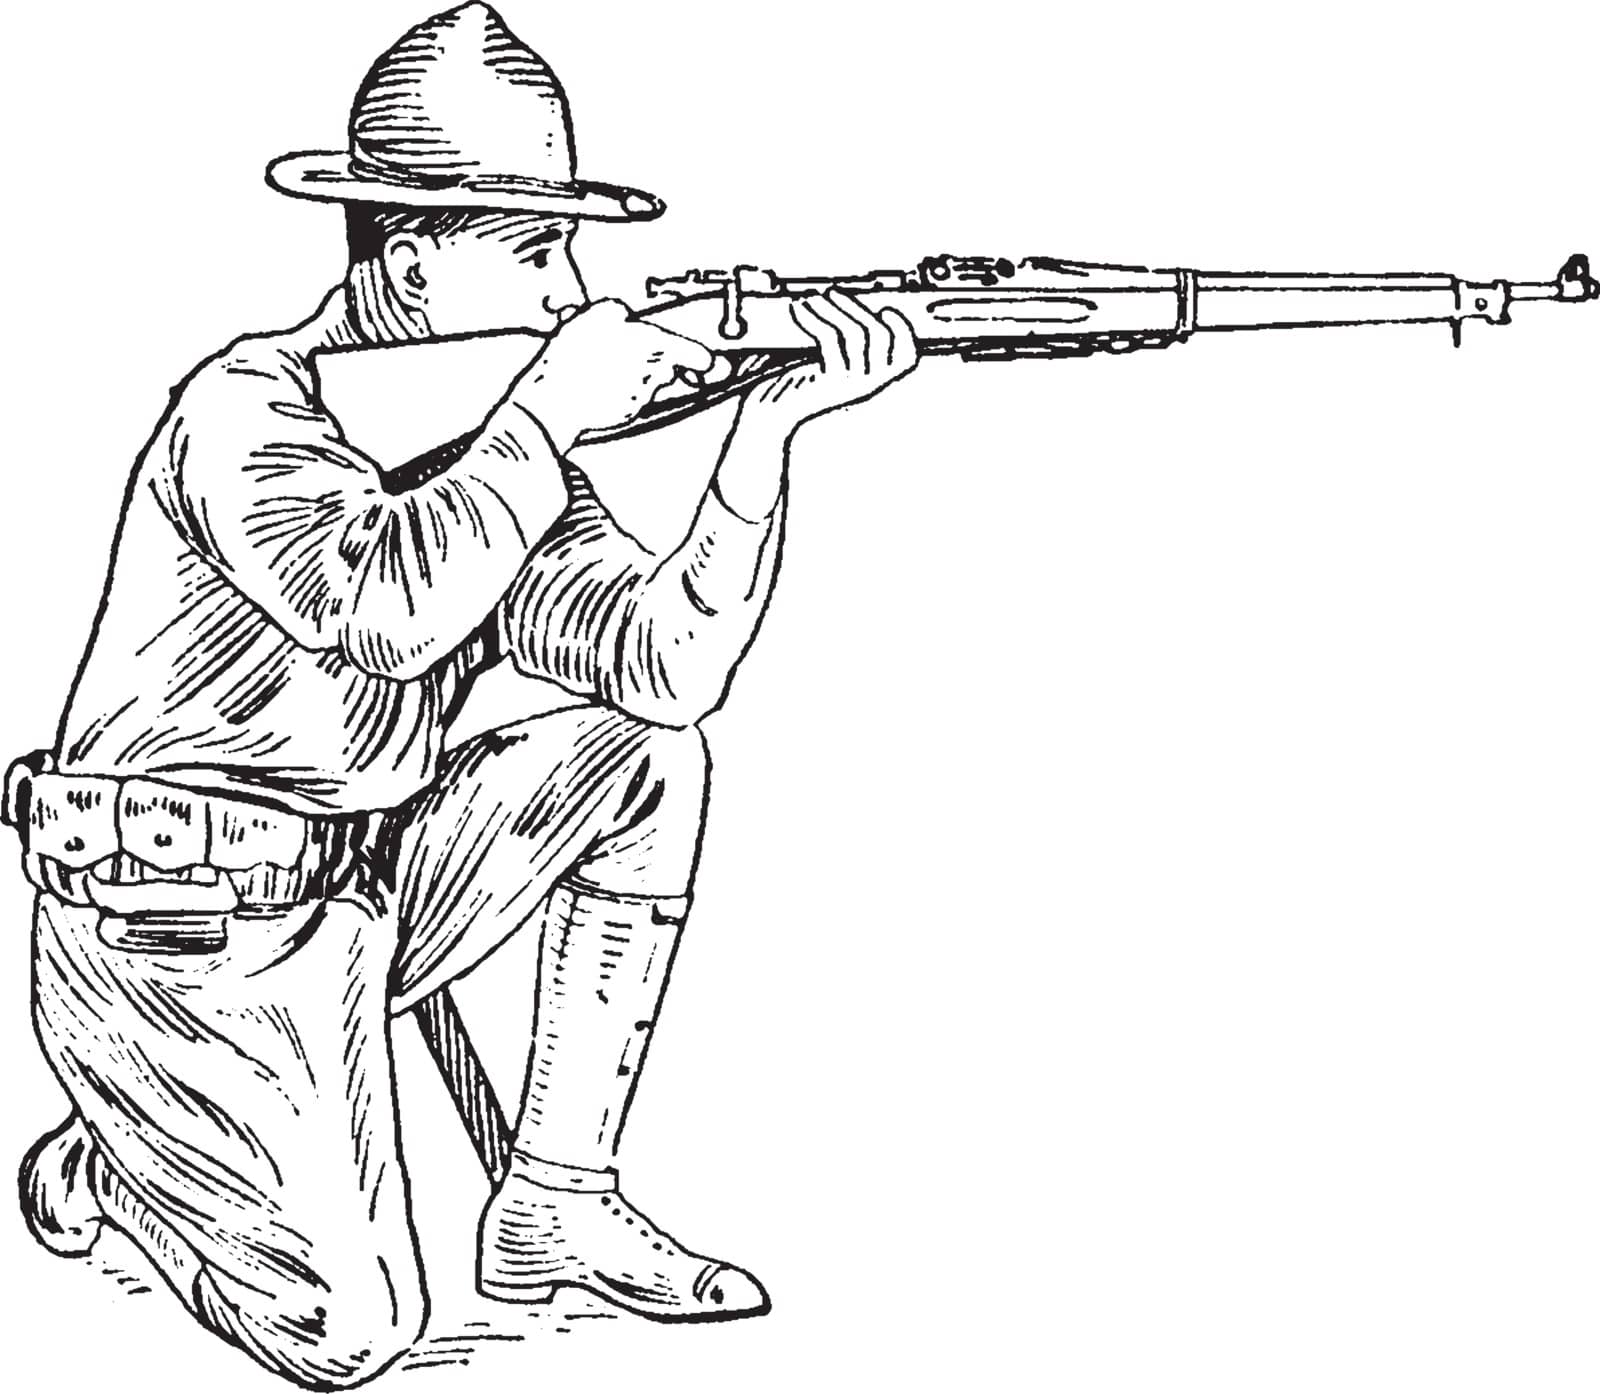 A soldier with rifle sitting on knees and looking through the notch of the rear sight so as to perceive the object aimed at it, vintage line drawing or engraving illustration